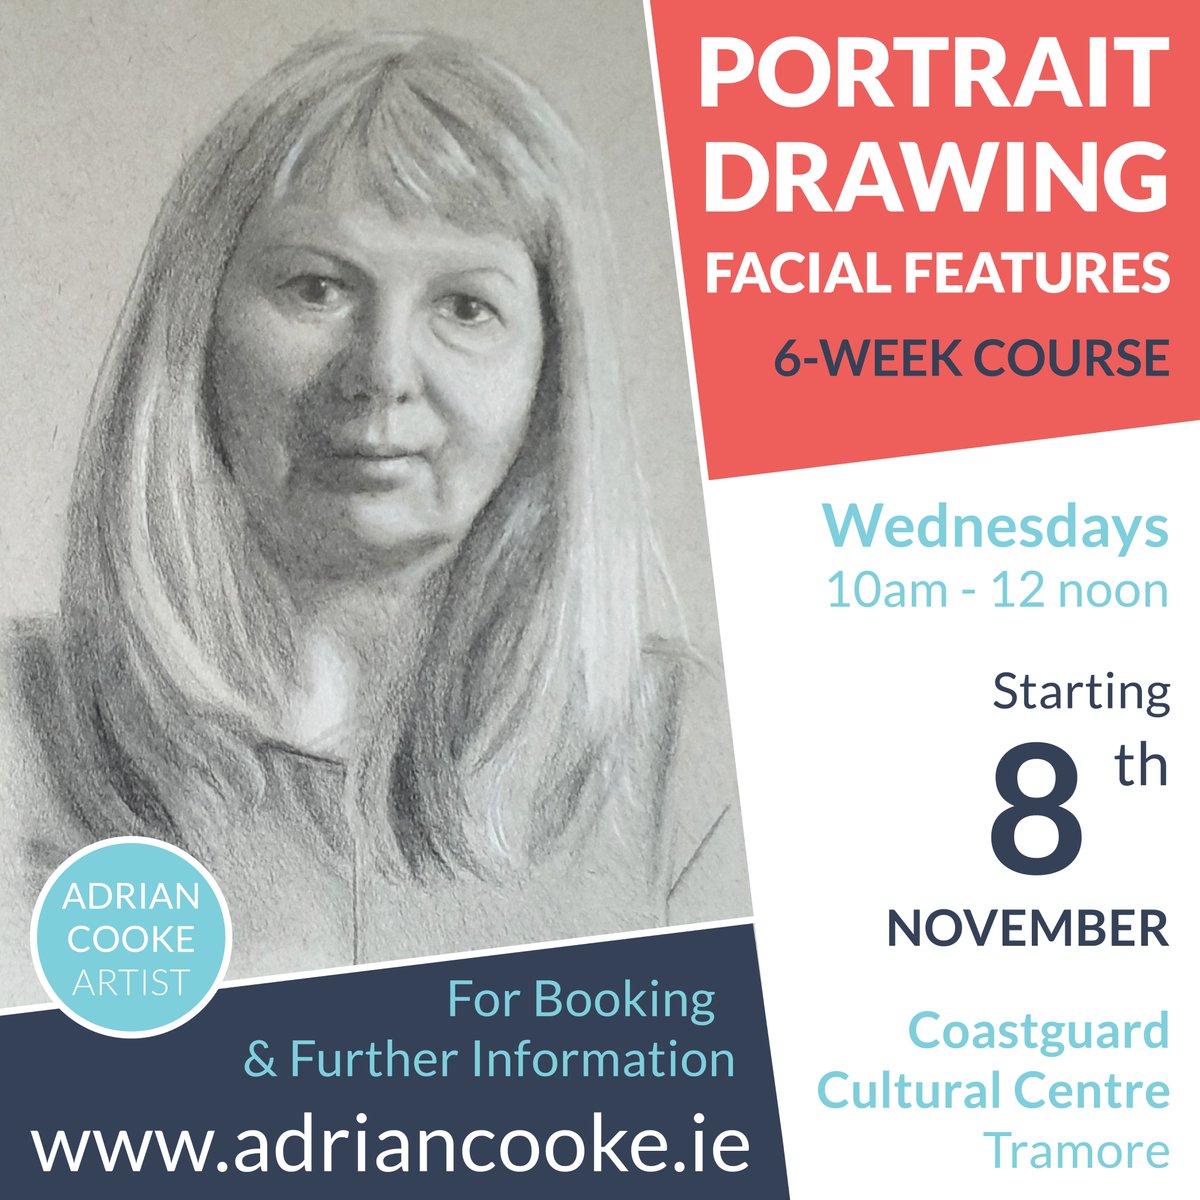 Art classes starting in November! Contact Adrian at adriancooke.ie for more information.